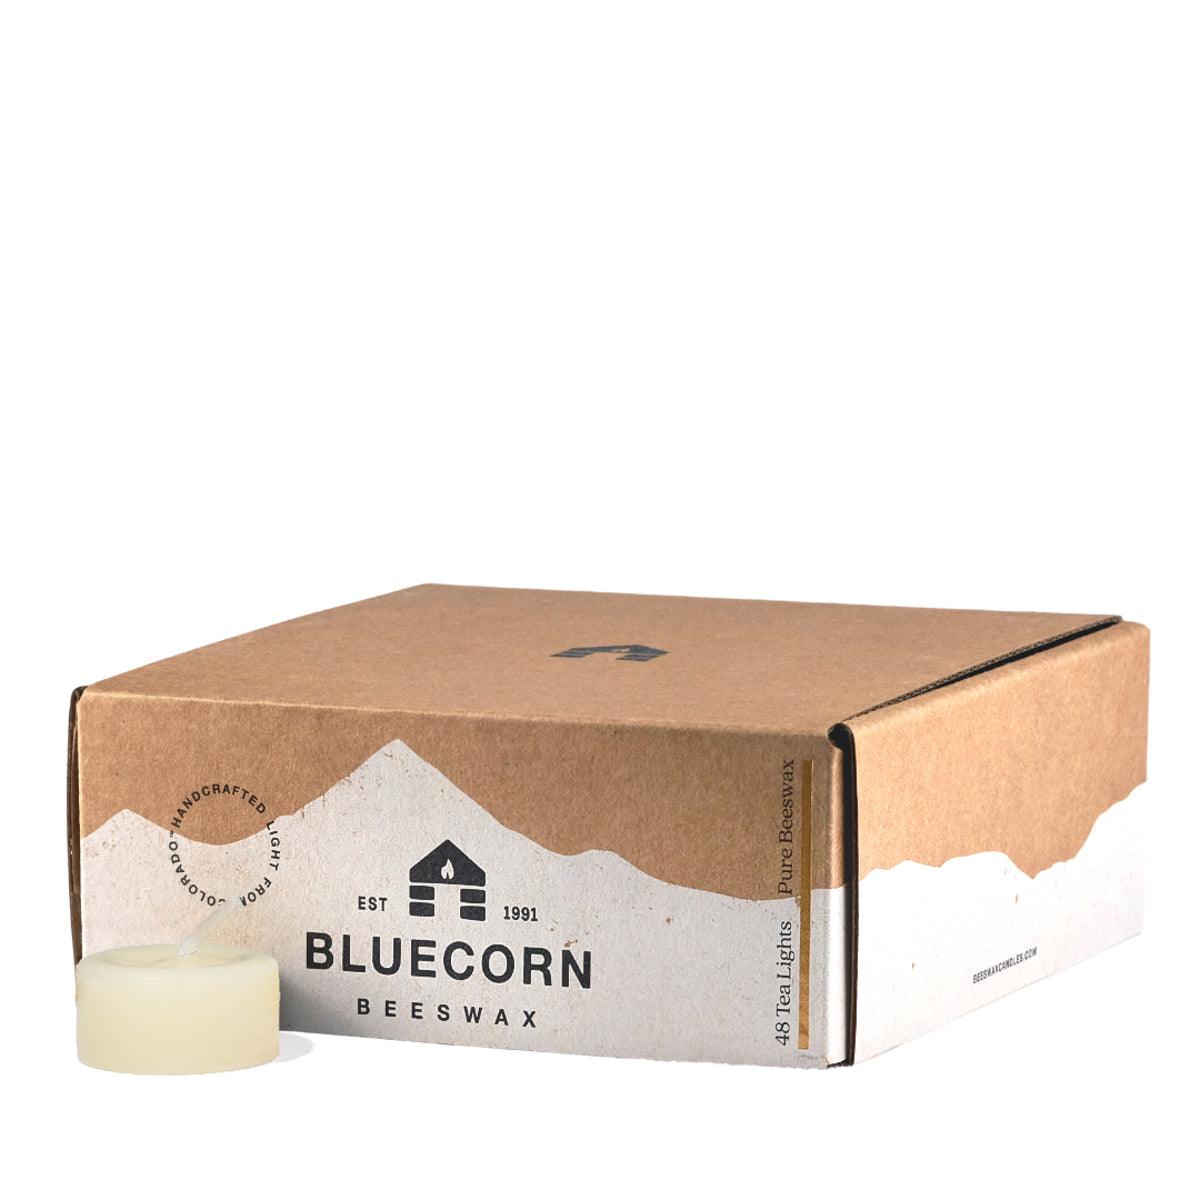 Bluecorn Beeswax 100% Pure Beeswax 48 Pack Ivory Tea Light Refill. Picture features one Tea Light outside of Bluecorn branded Tea Light Box with a white background. Box features Bluecorn Beeswax name and logo, with an outline of Mt. Wilson in white printed on a 100% recycled kraft paper box. Tea lights will burn for about 5 hours each.